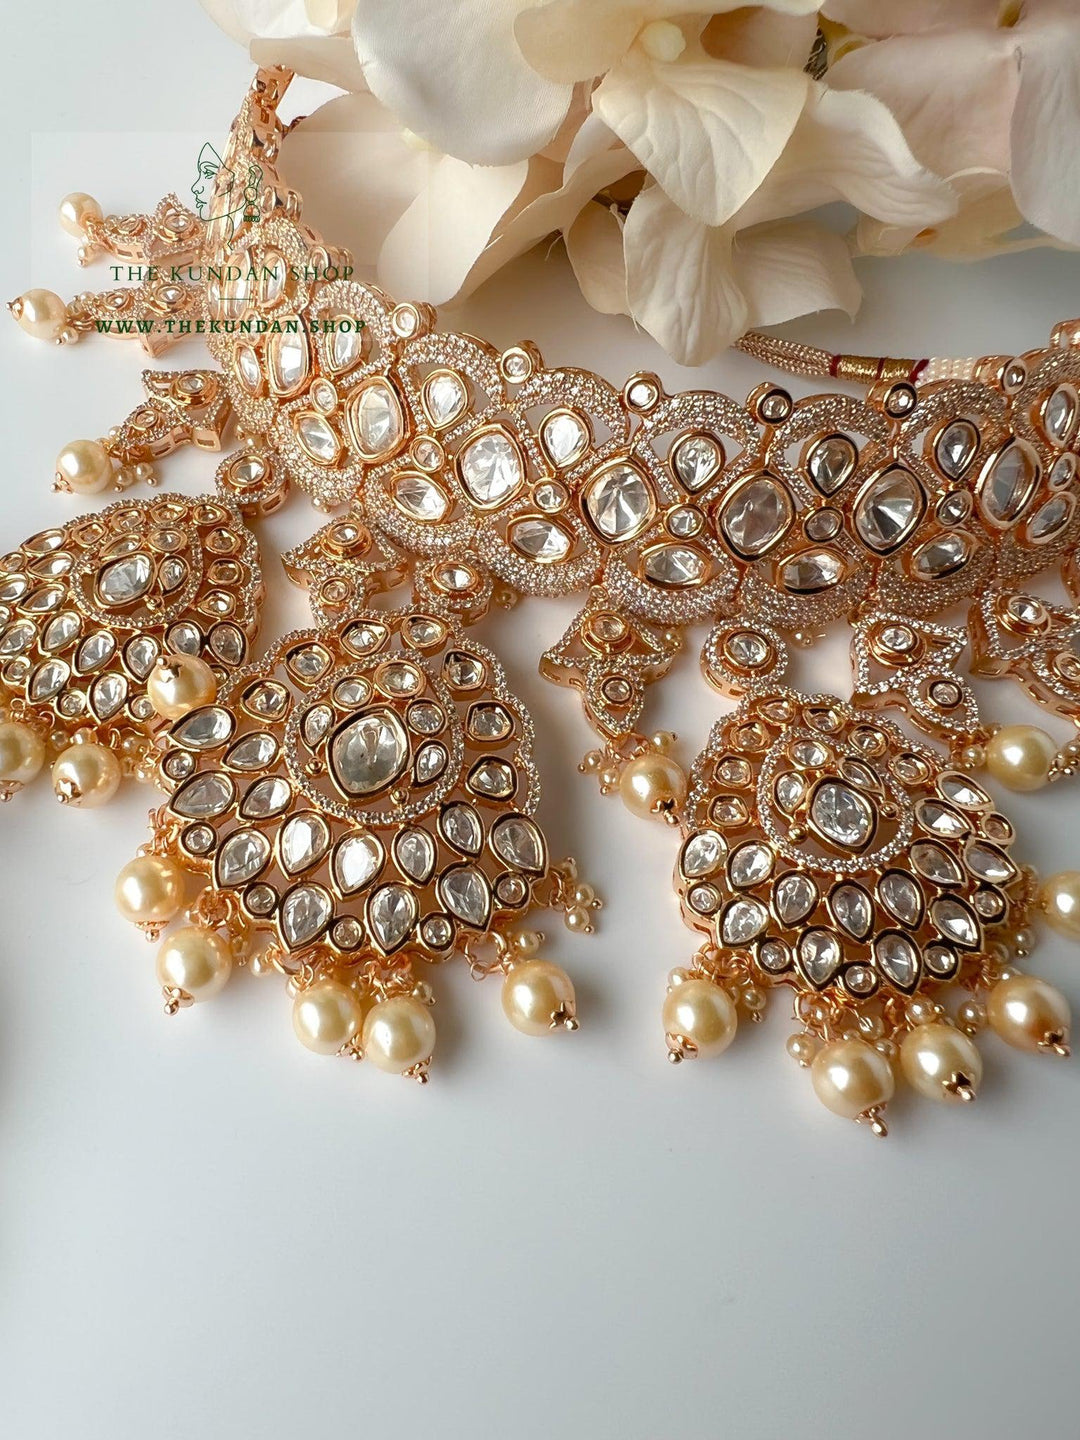 Romance in Pearl Necklace Sets THE KUNDAN SHOP 